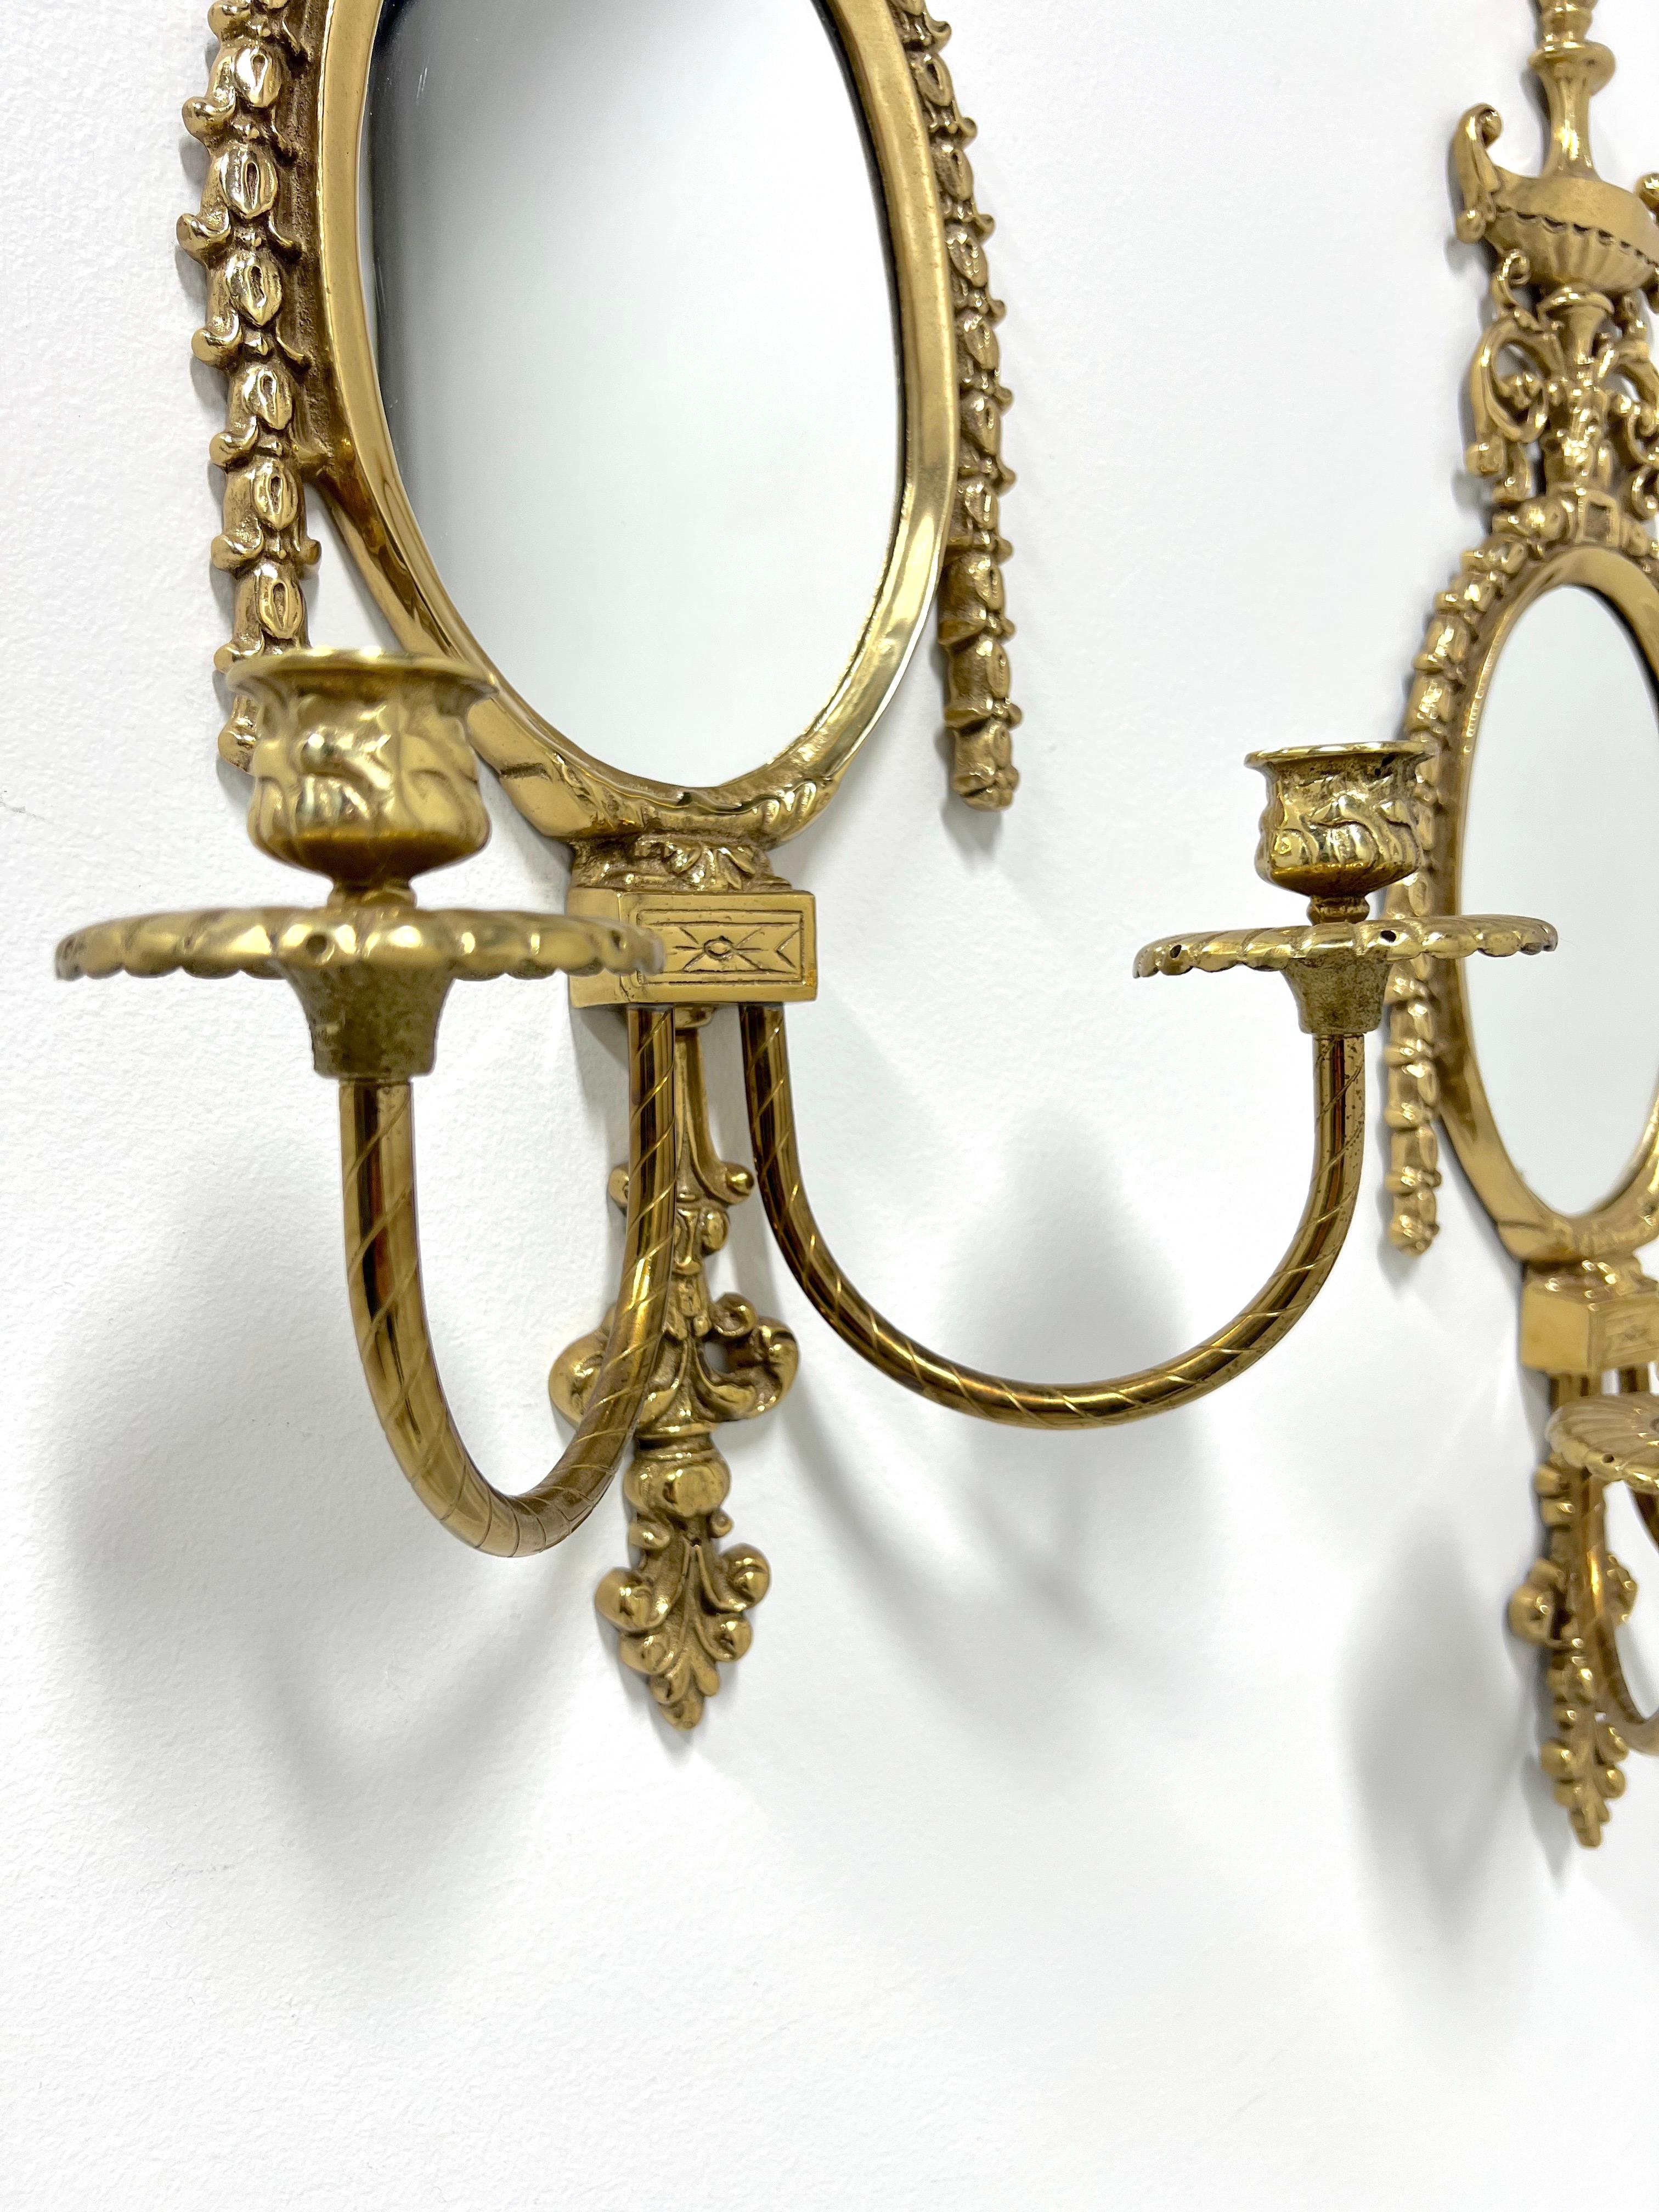 GLO-MAR ARTWORKS Mid 20th Century Brass French Provincial Candle Sconces - Pair For Sale 2